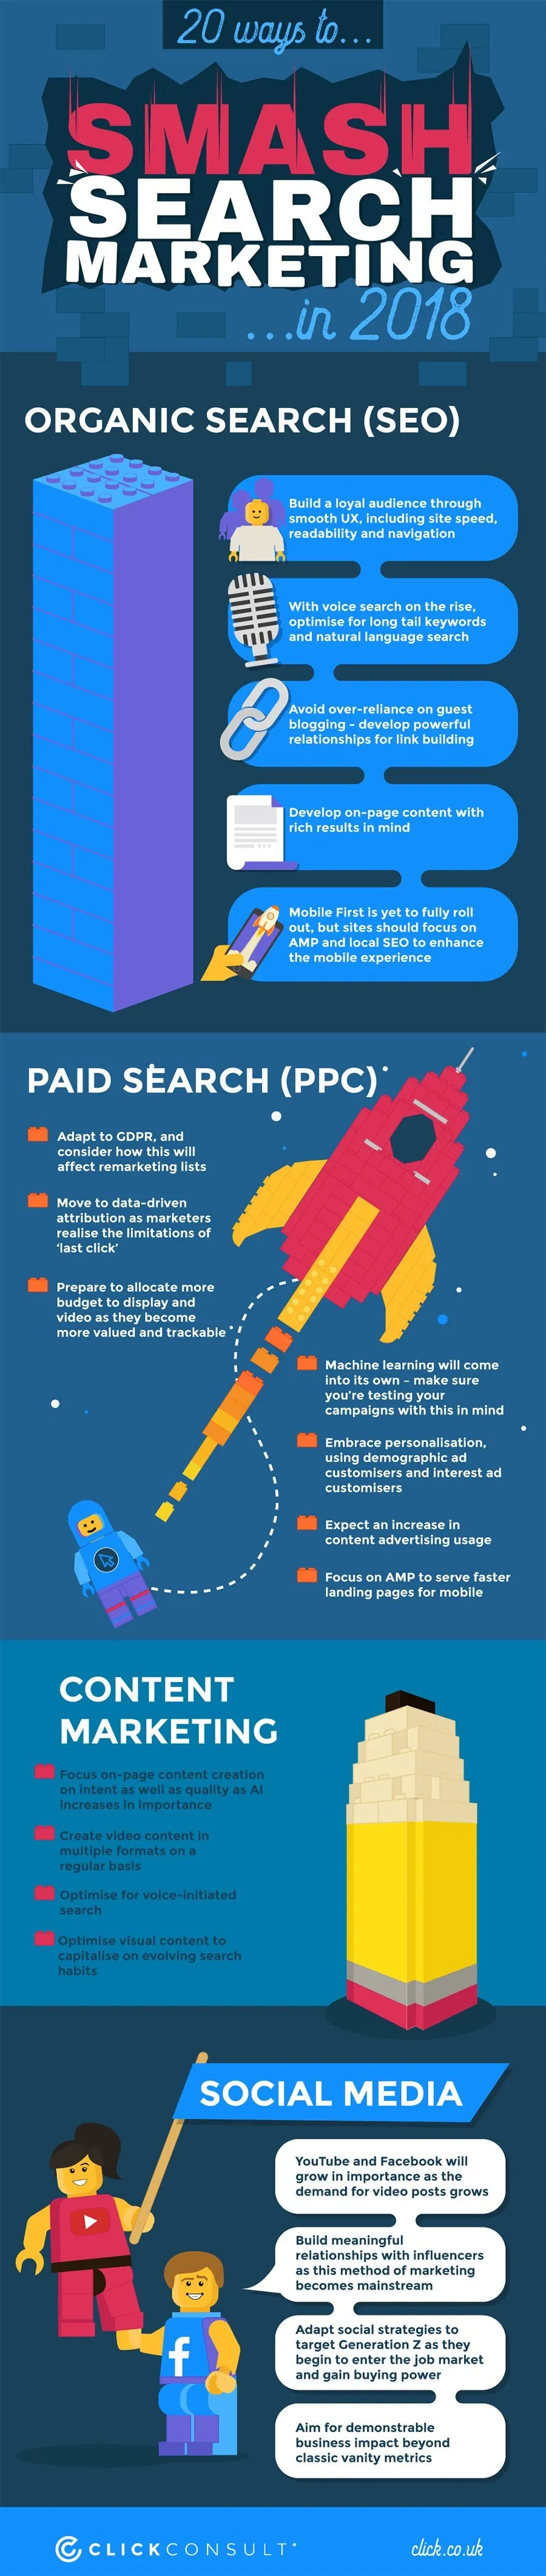 20 Ways to Smash Search Marketing in 2018 - #infographic